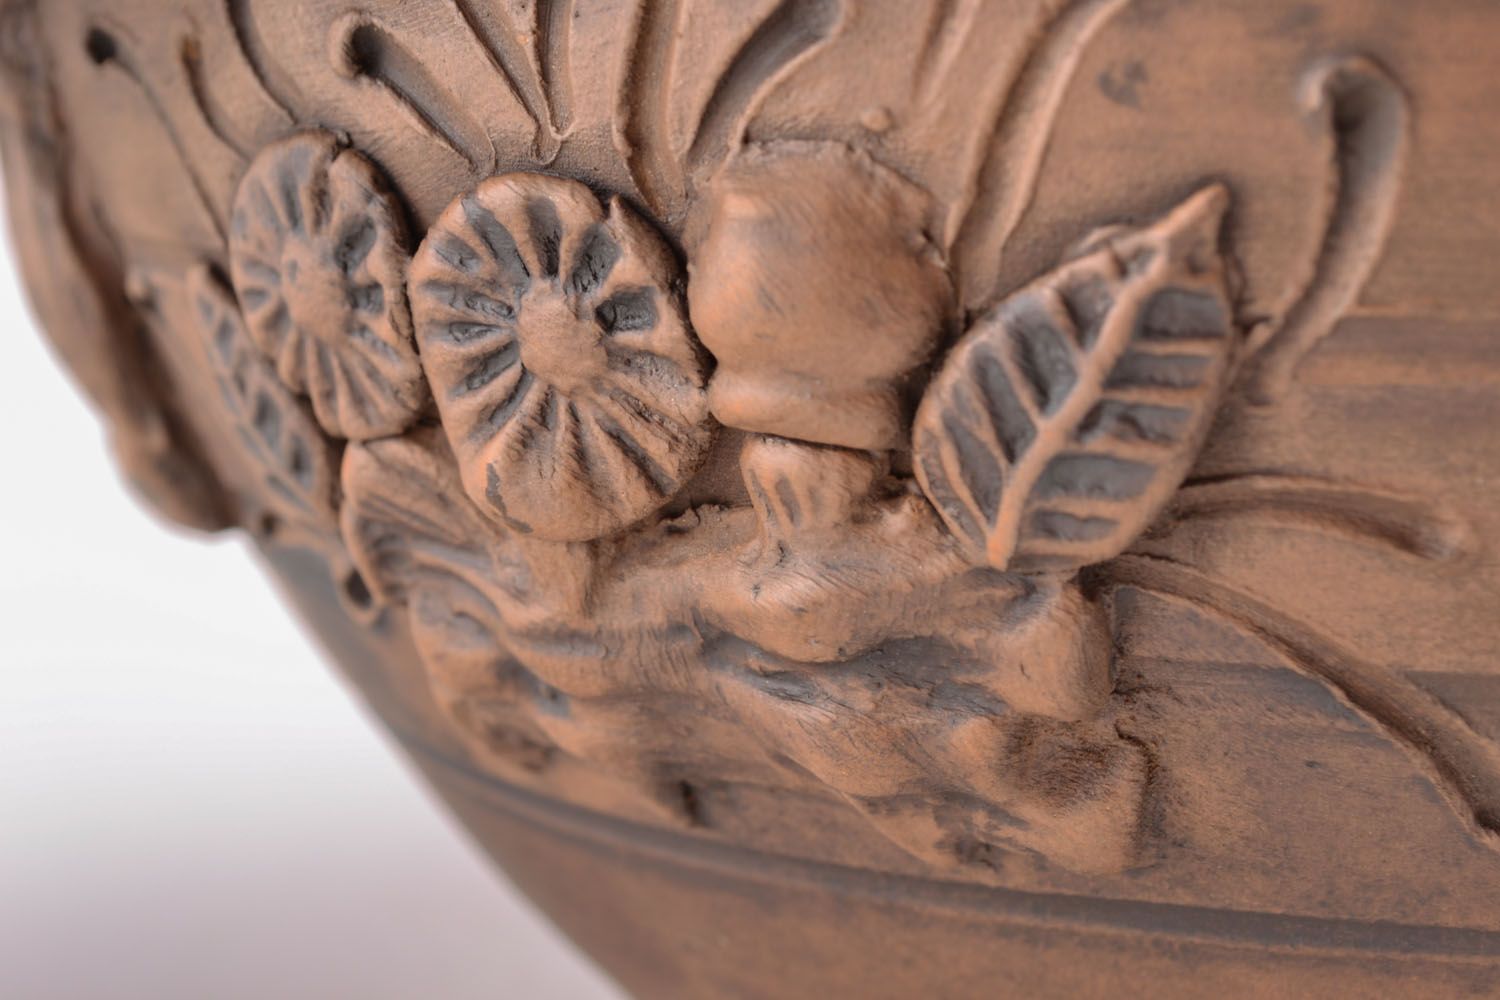 Clay pot with lid photo 3